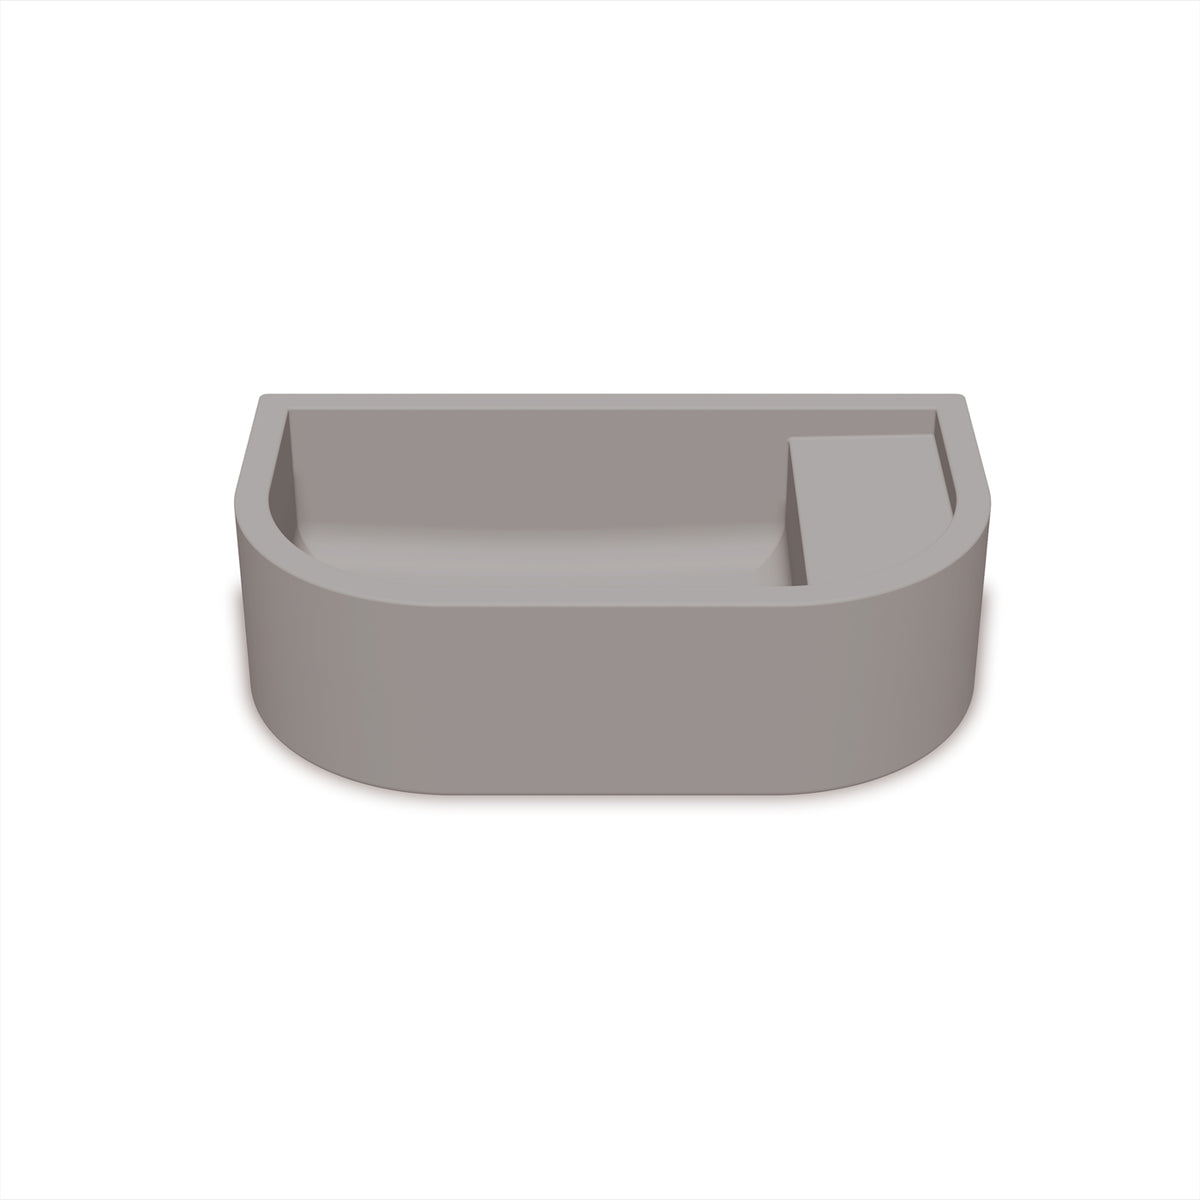 Loop 01 Basin - Overflow - Surface Mount (Sky Grey,No Tap Hole,White)